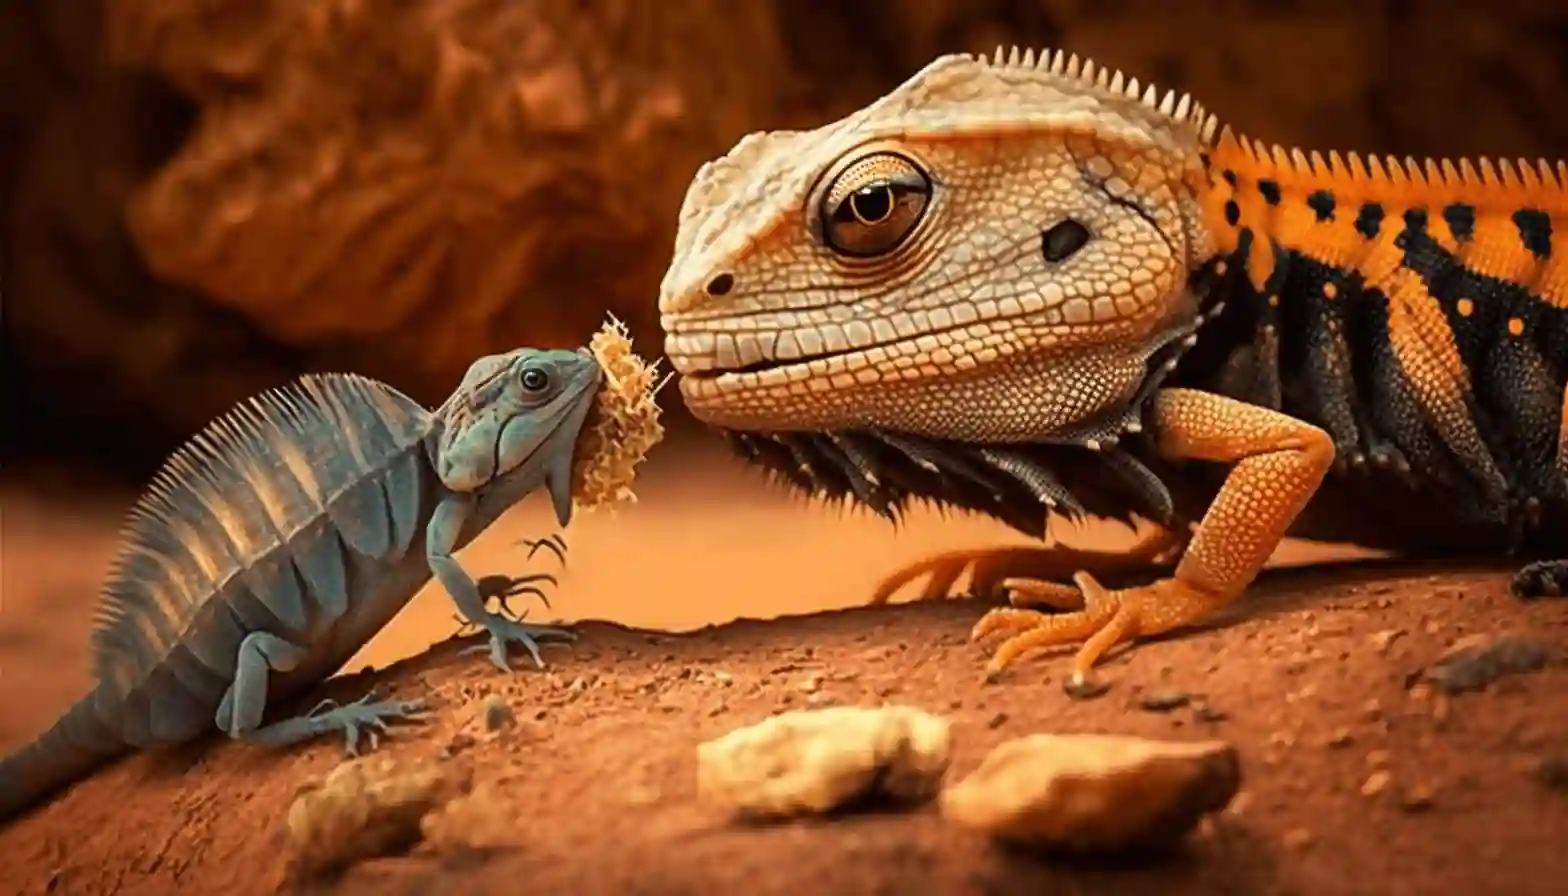 Can Bearded Dragons Eat Mealworm Beetles?